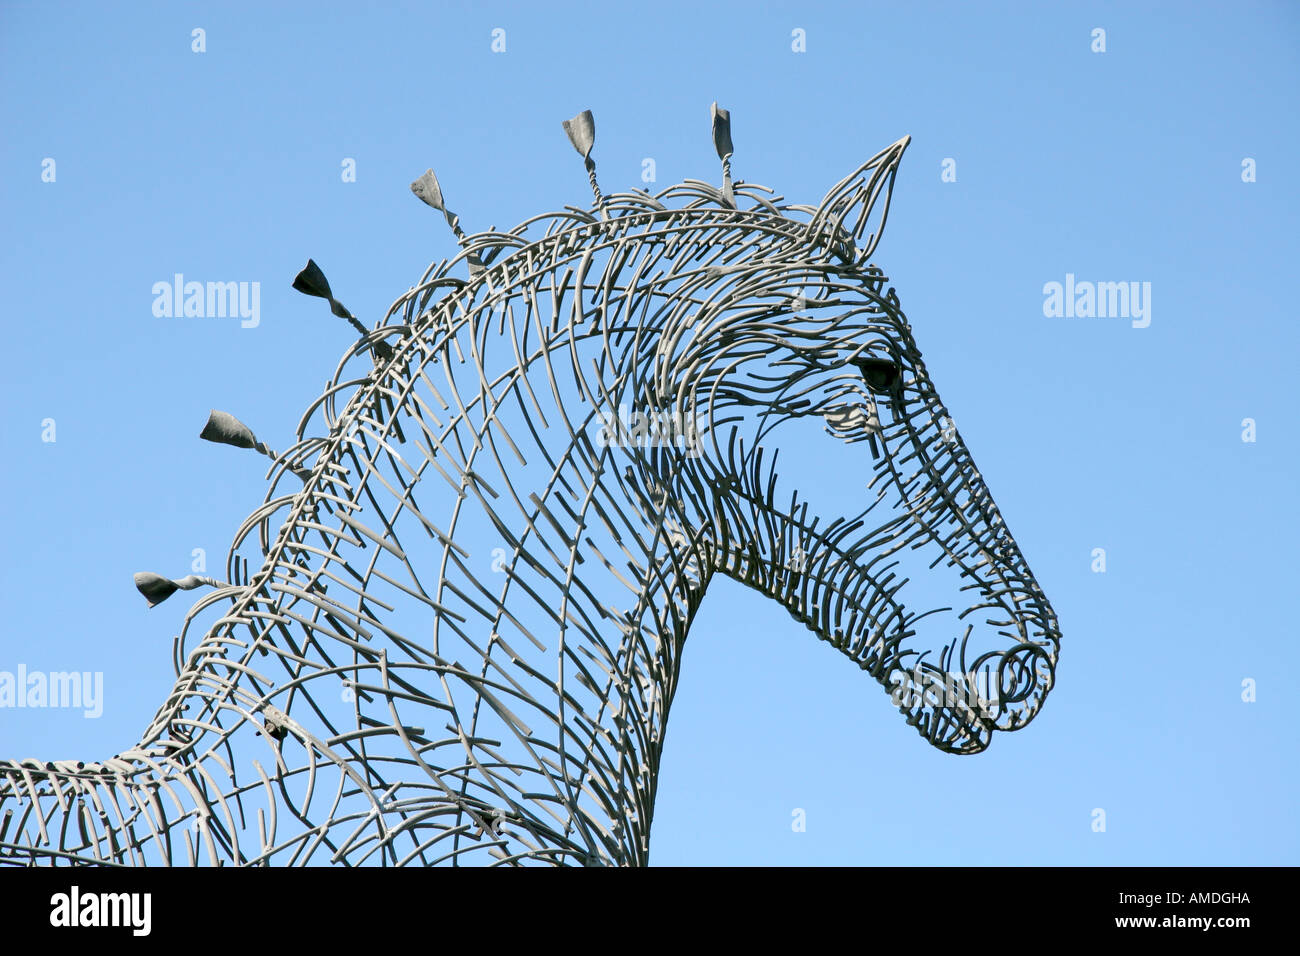 The Heavy Horse sculpture by Adam Scott 4 5 metres high built of galvanised steel Glasgow Scotland. Can be seen whiled riving west on the M8 motorway. Stock Photo